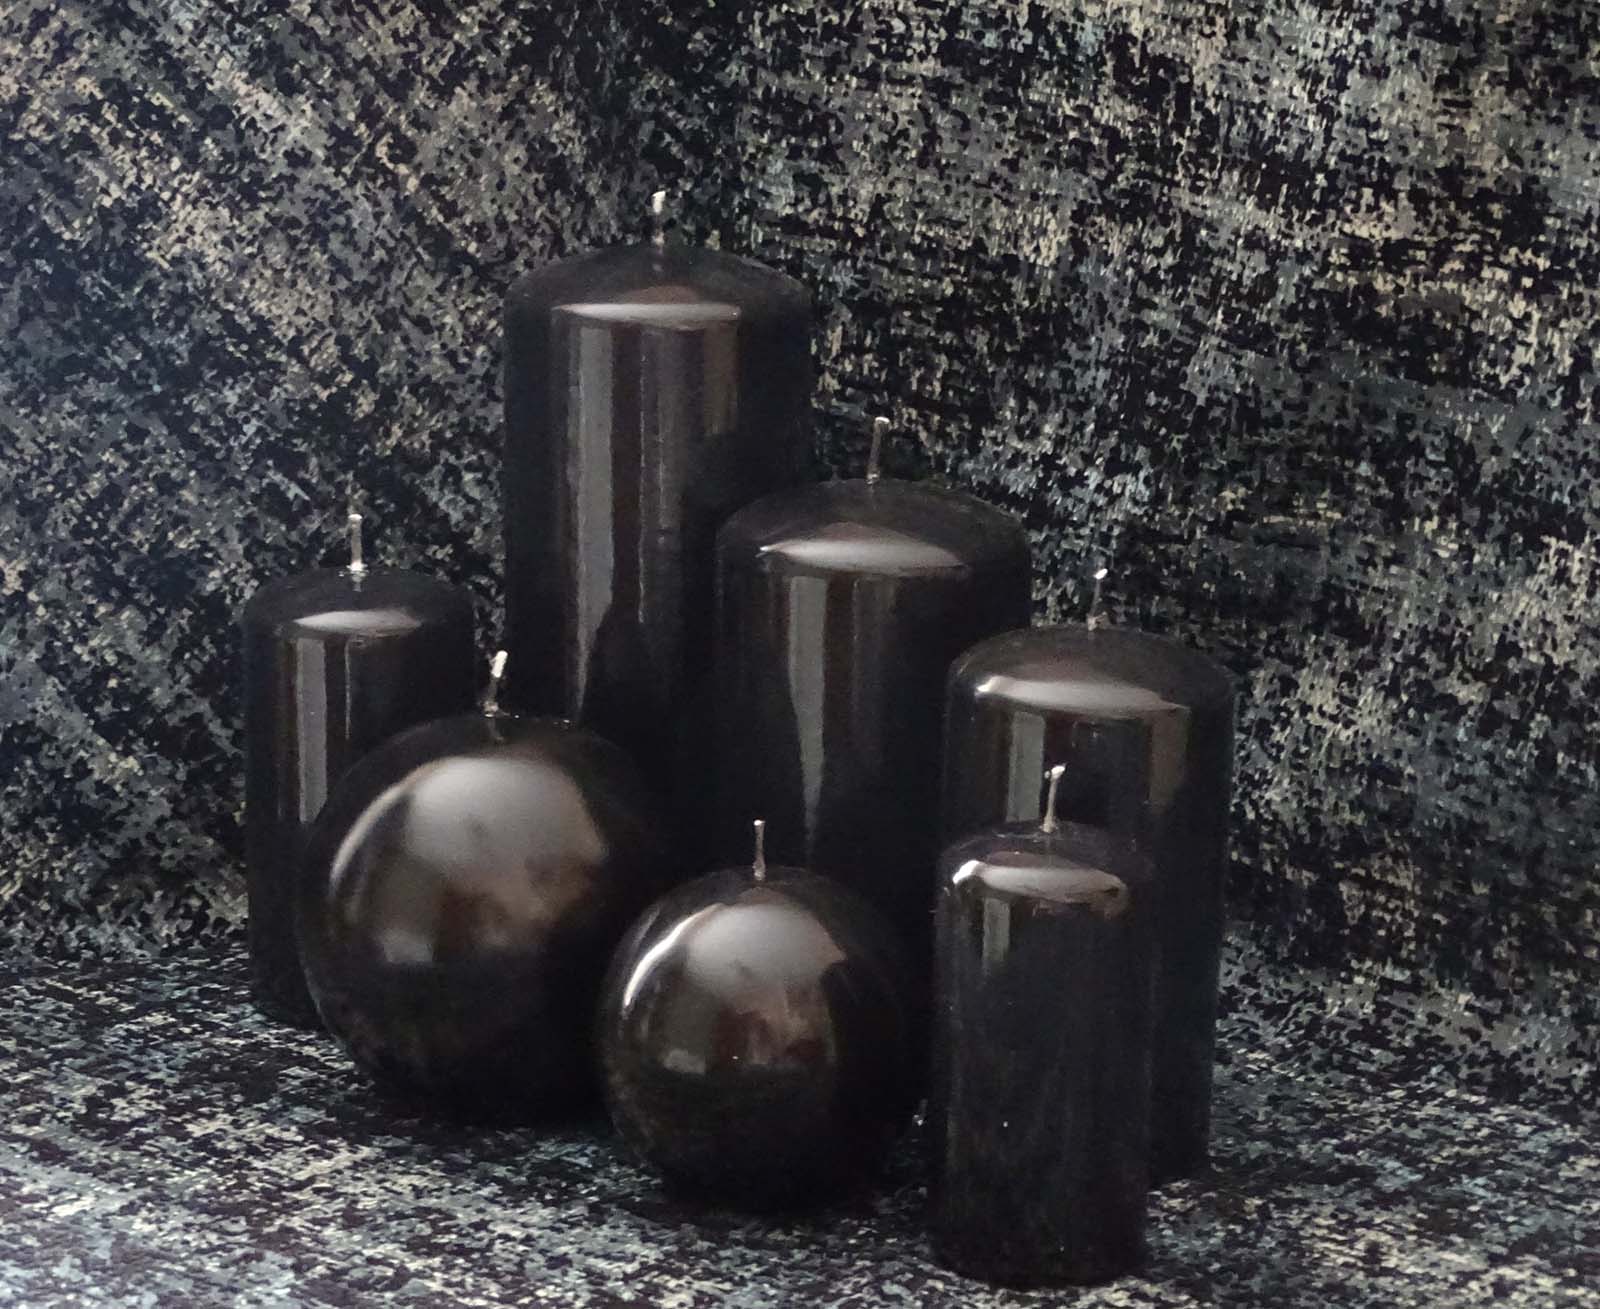 Five pillar and two round black gloss candles sitting on the black and gray cloth